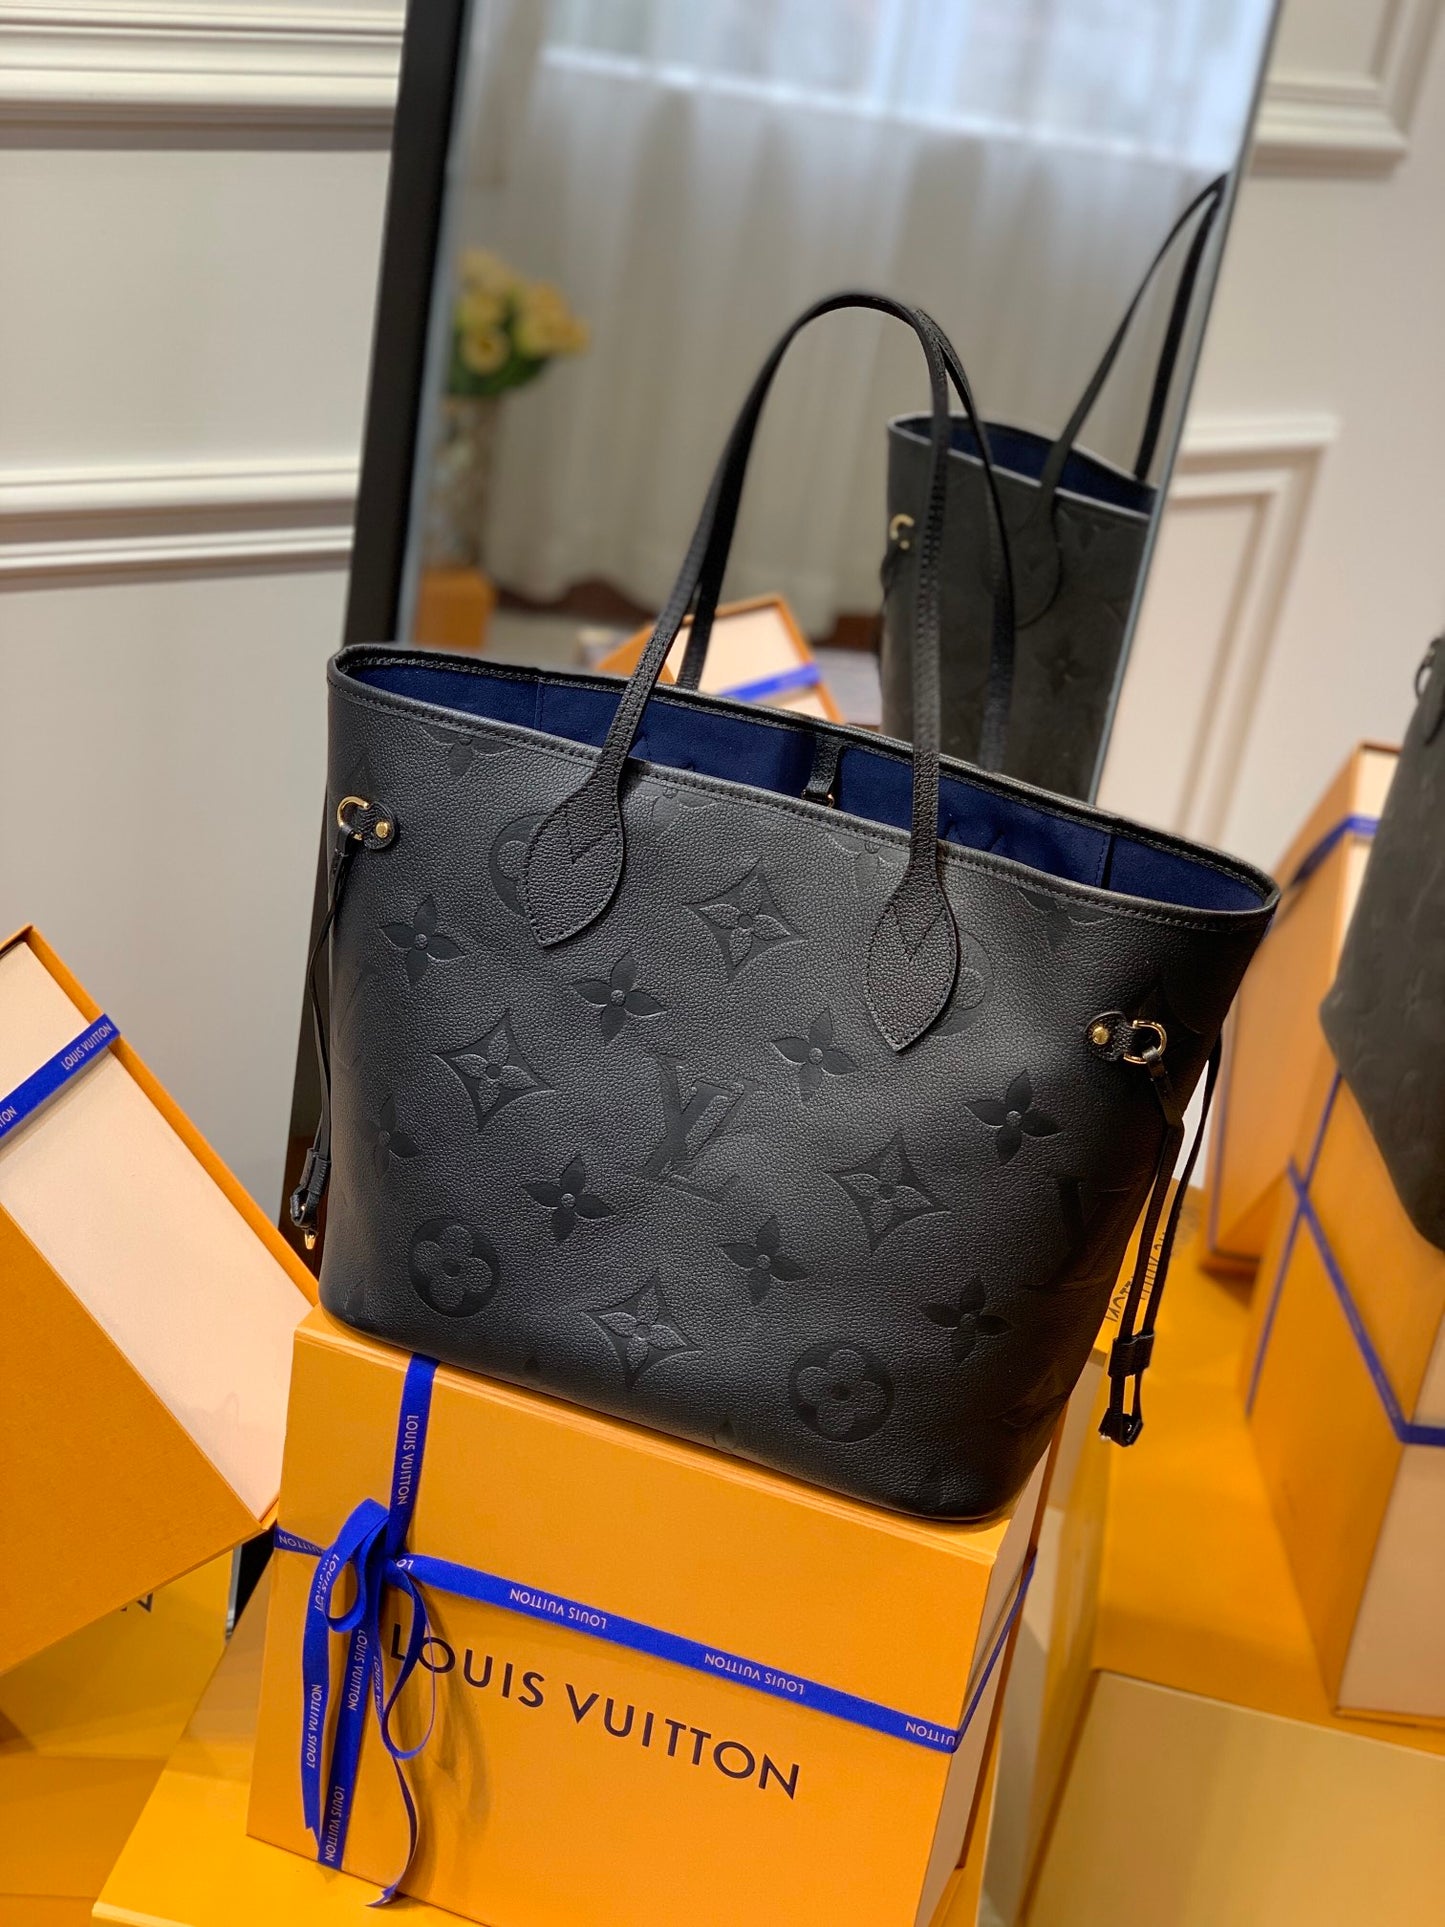 A Review of Louis Vuuitton Neverfull empreinte leather bag